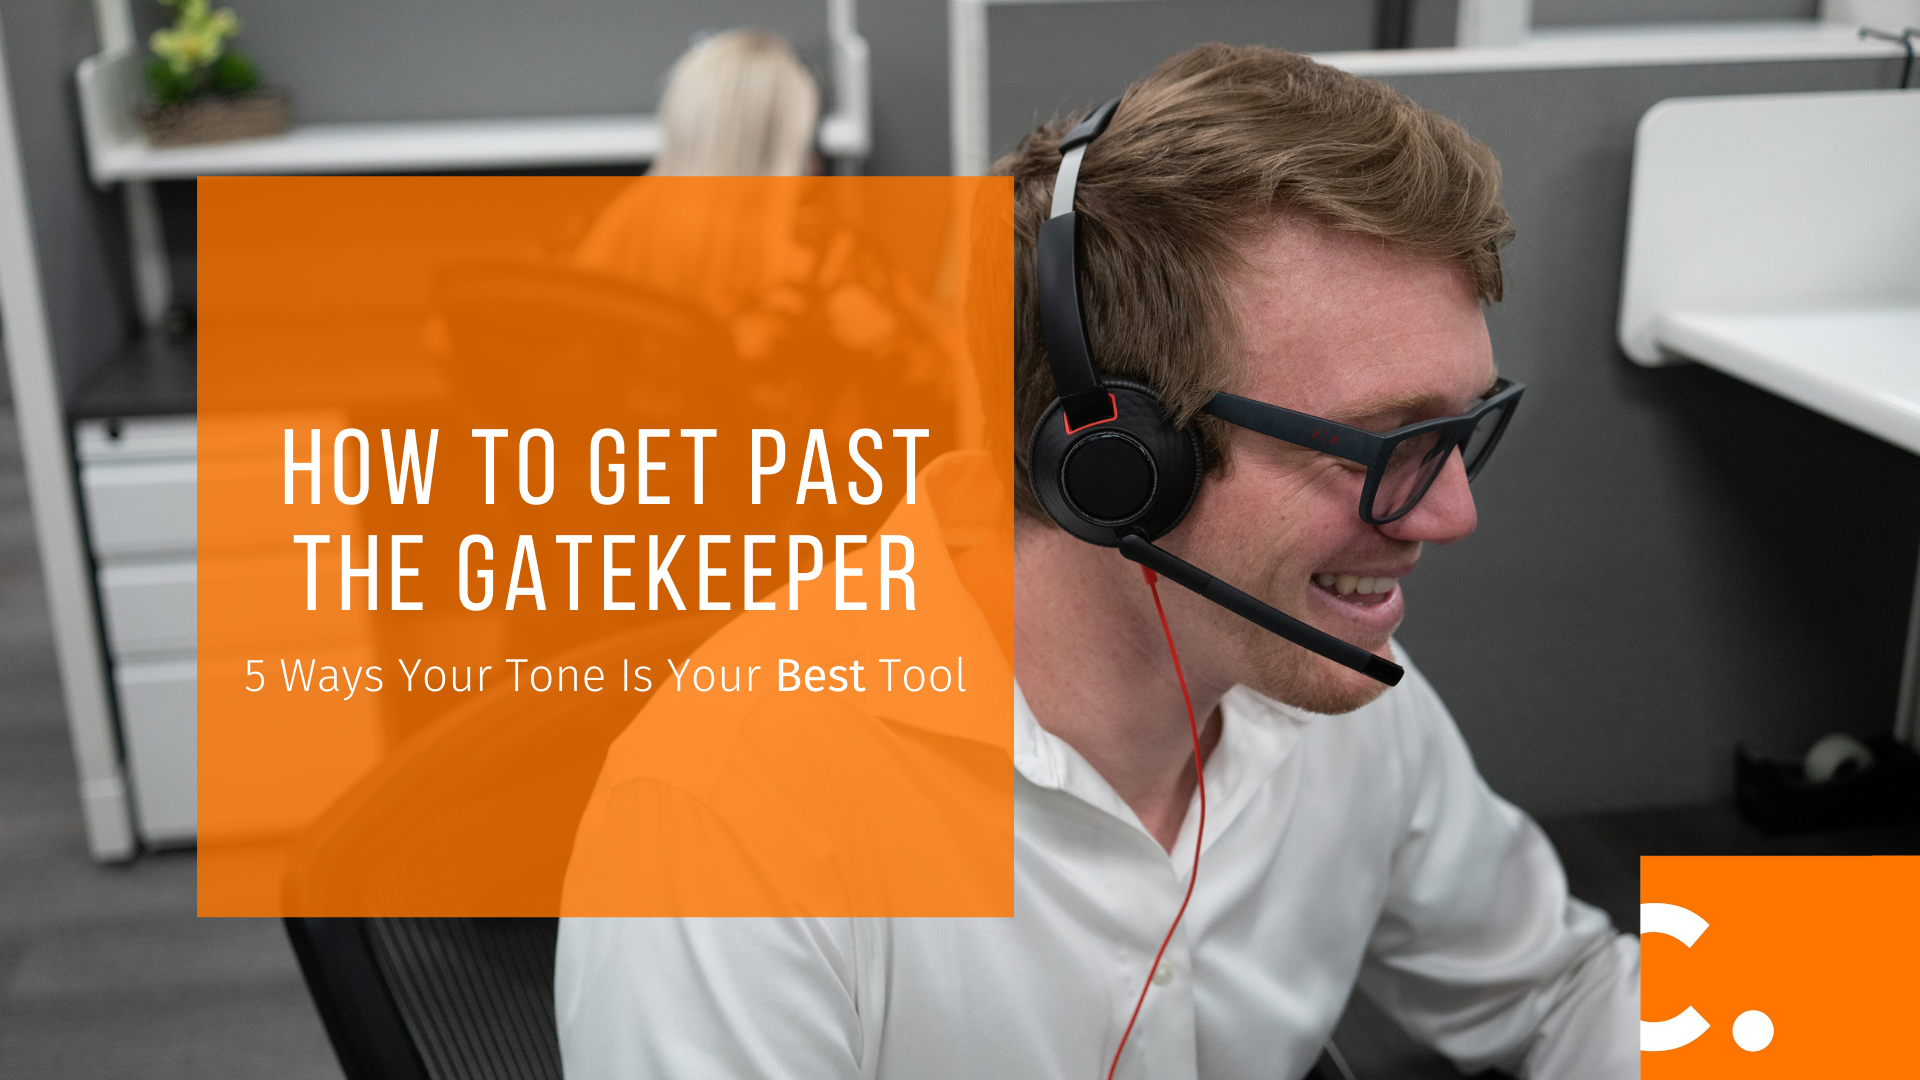 Getting past the gatekeeper can be one of the biggest challenges in sales development. Read our tips on how to get to the decision maker.